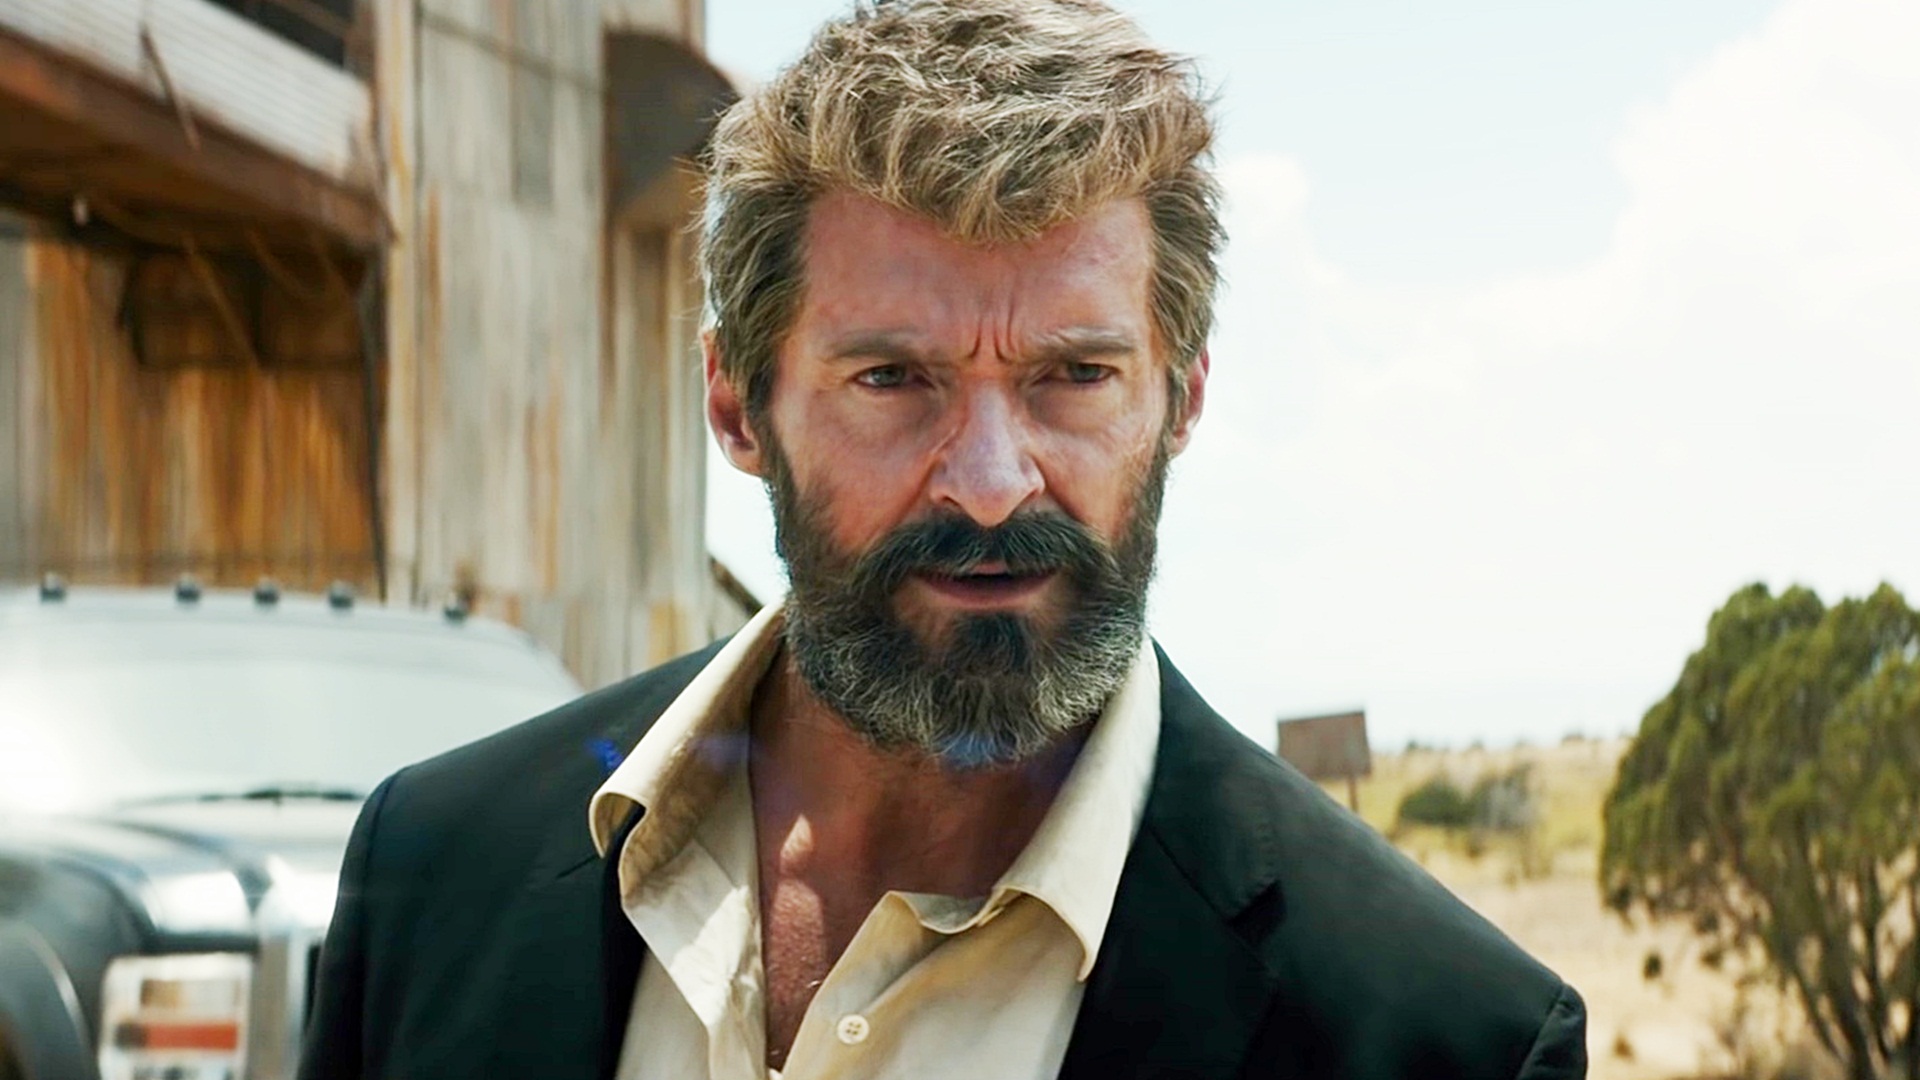 10 Reasons Why “Logan” is the Best Superhero Movie Since “The Dark Knight”